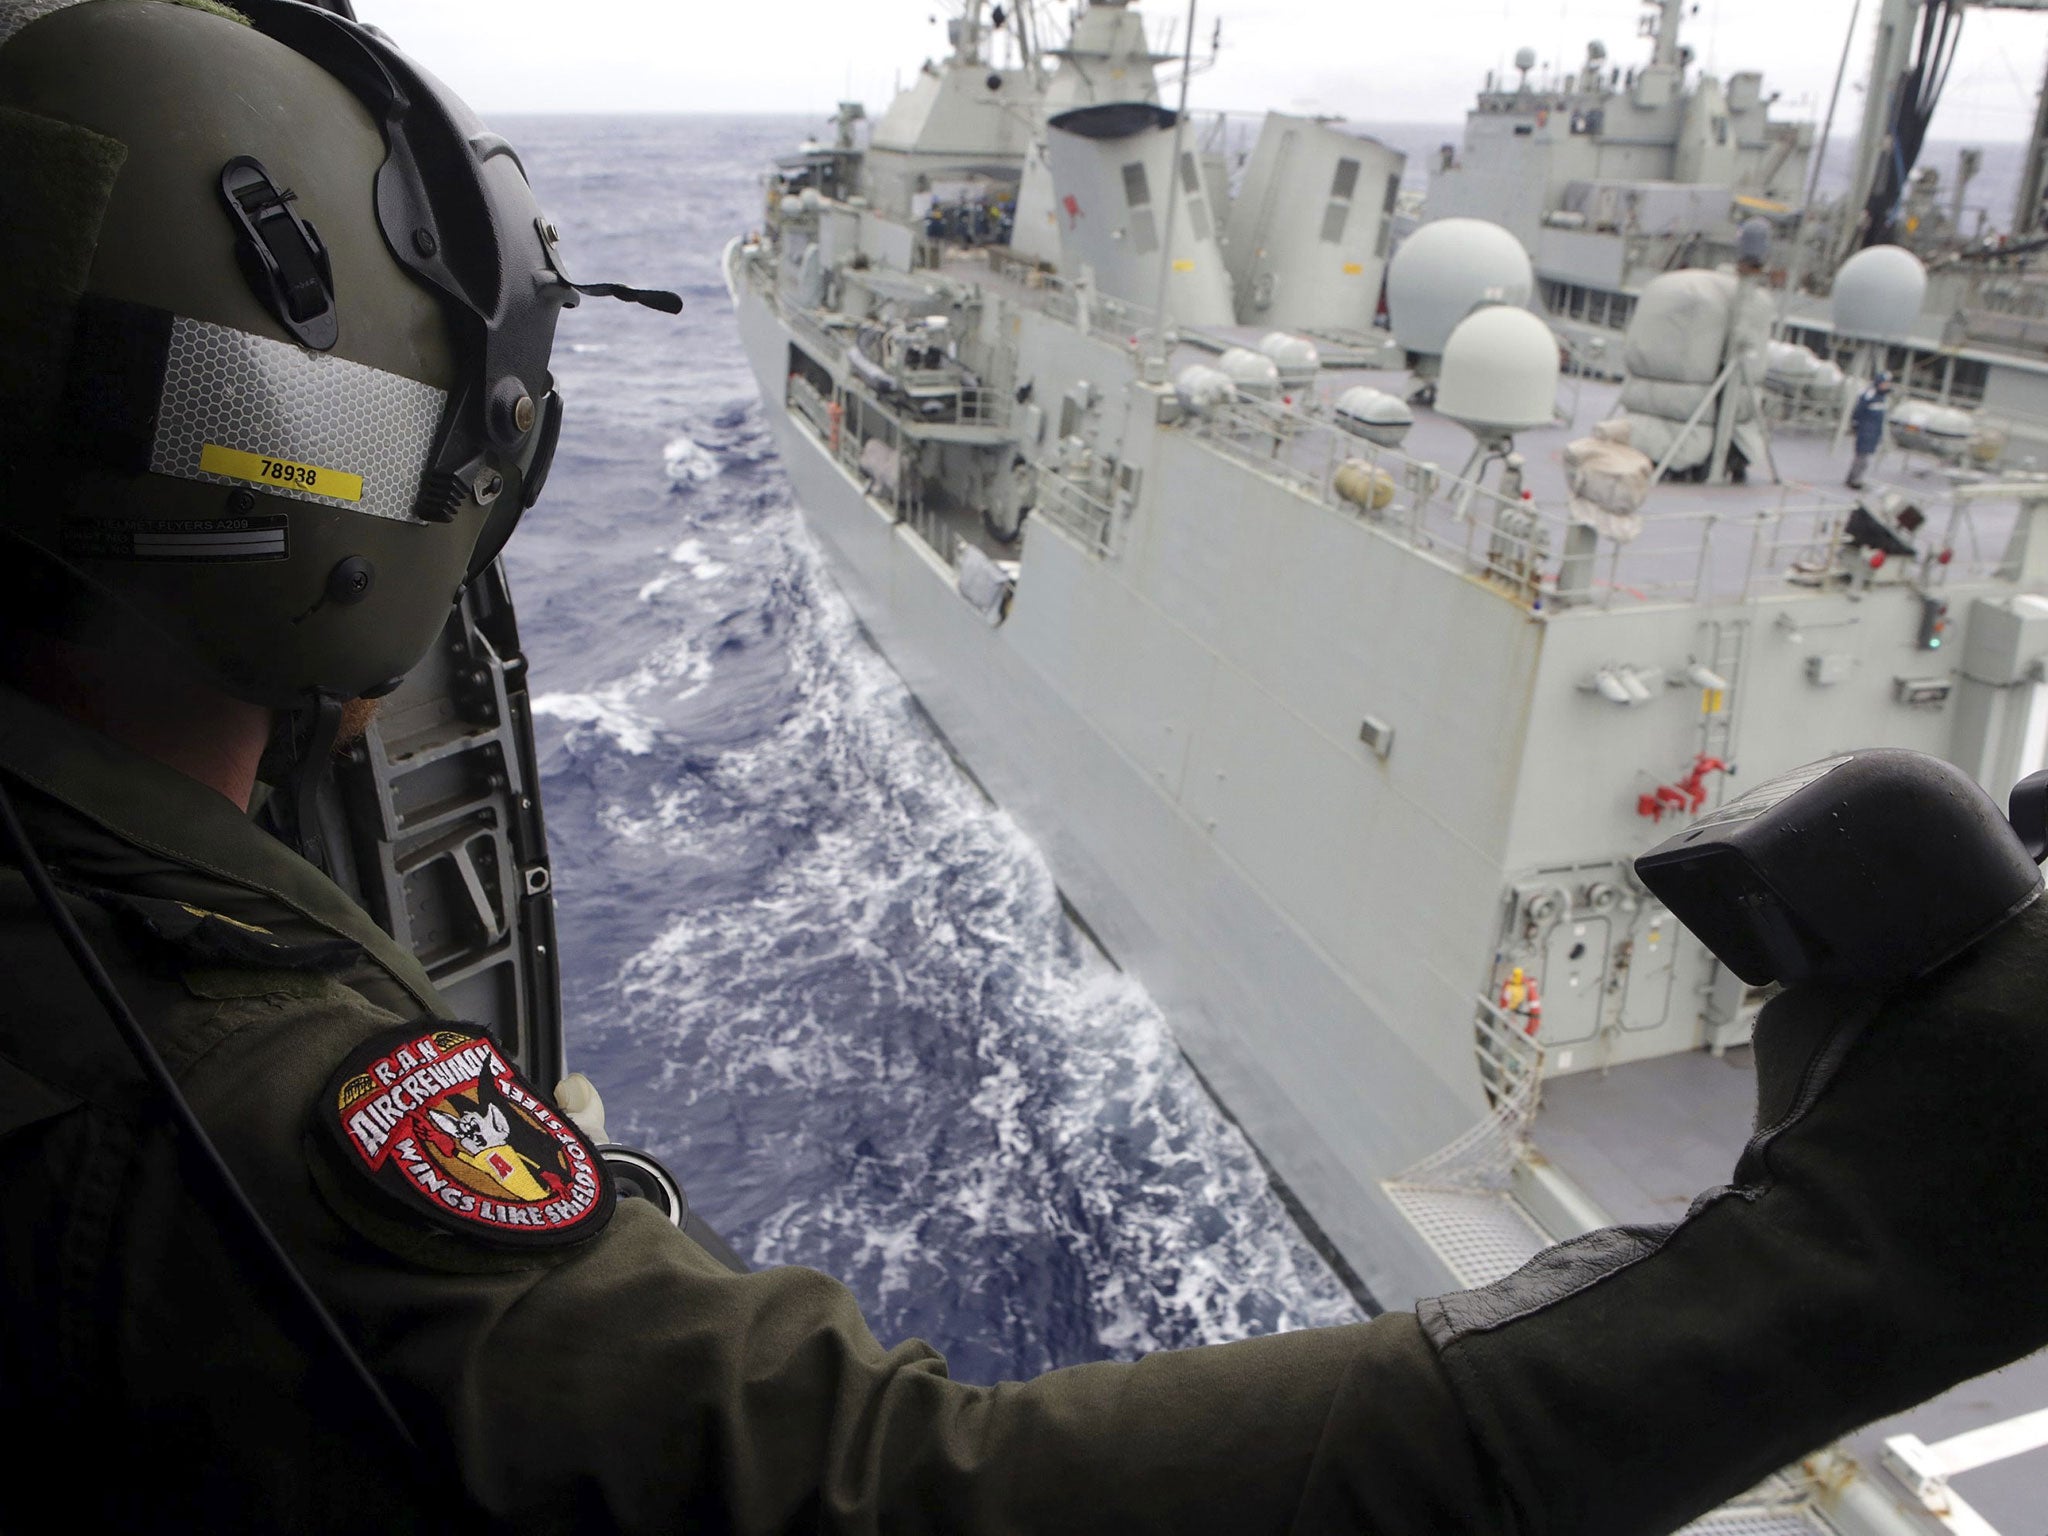 Leading Seaman Aircrewman Joel Young looks out from Tiger75, an S-70B-2 Seahawk helicopter, after it launched from the Australian Navy ship the HMAS Toowoomba as it continues the search in the southern Indian Ocean for the missing Malaysian Airlines fligh